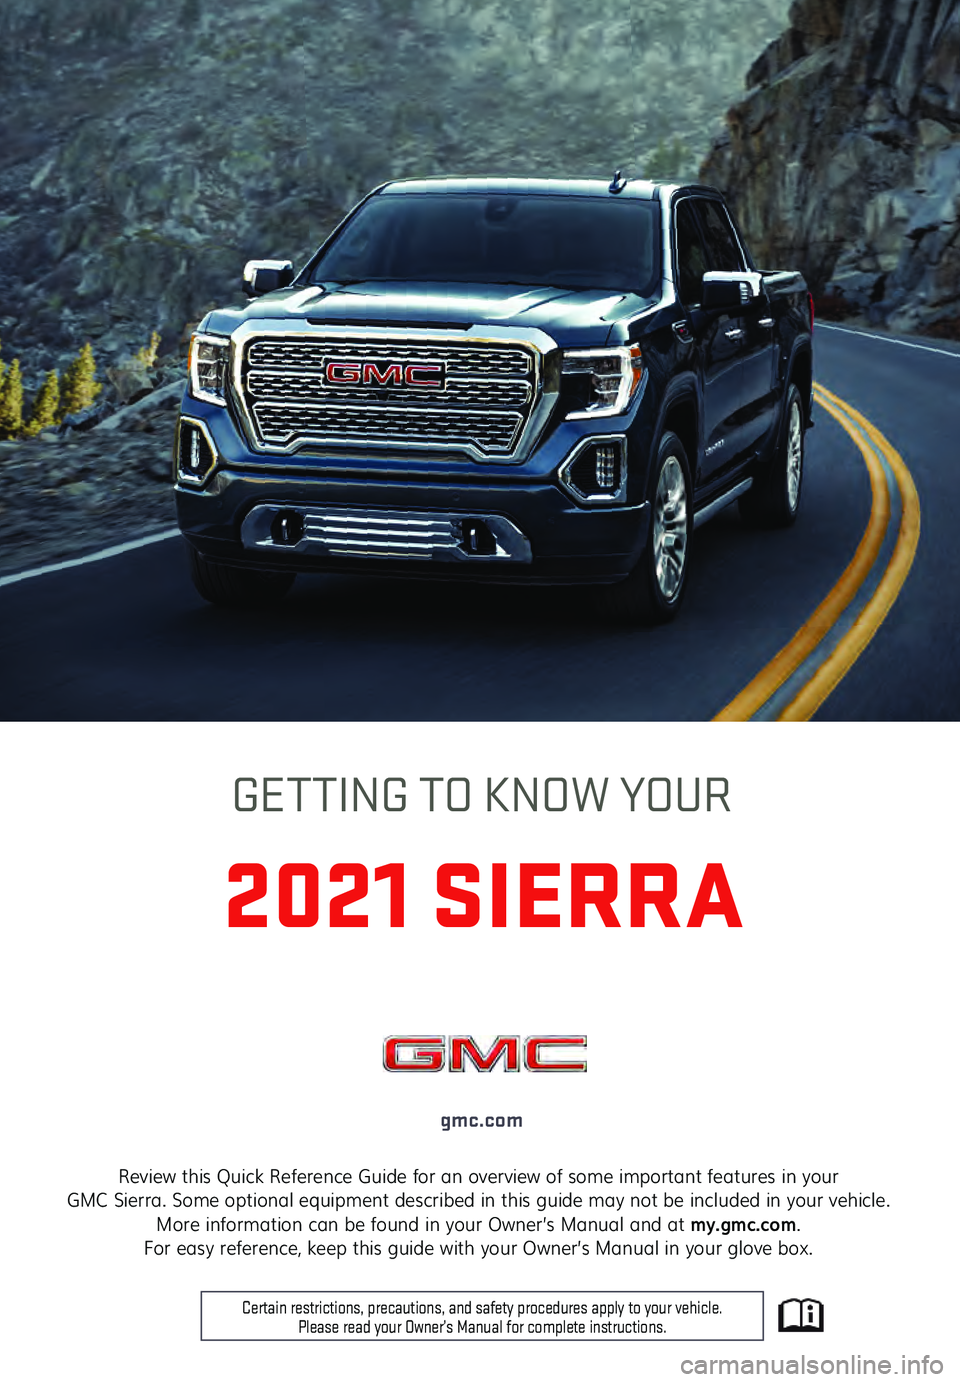 GMC SIERRA 2021  Get To Know Guide 1
Review this Quick Reference Guide for an overview of some important features in your  
GMC Sierra. Some optional equipment described in this guide may not be included in your vehicle.  More informat